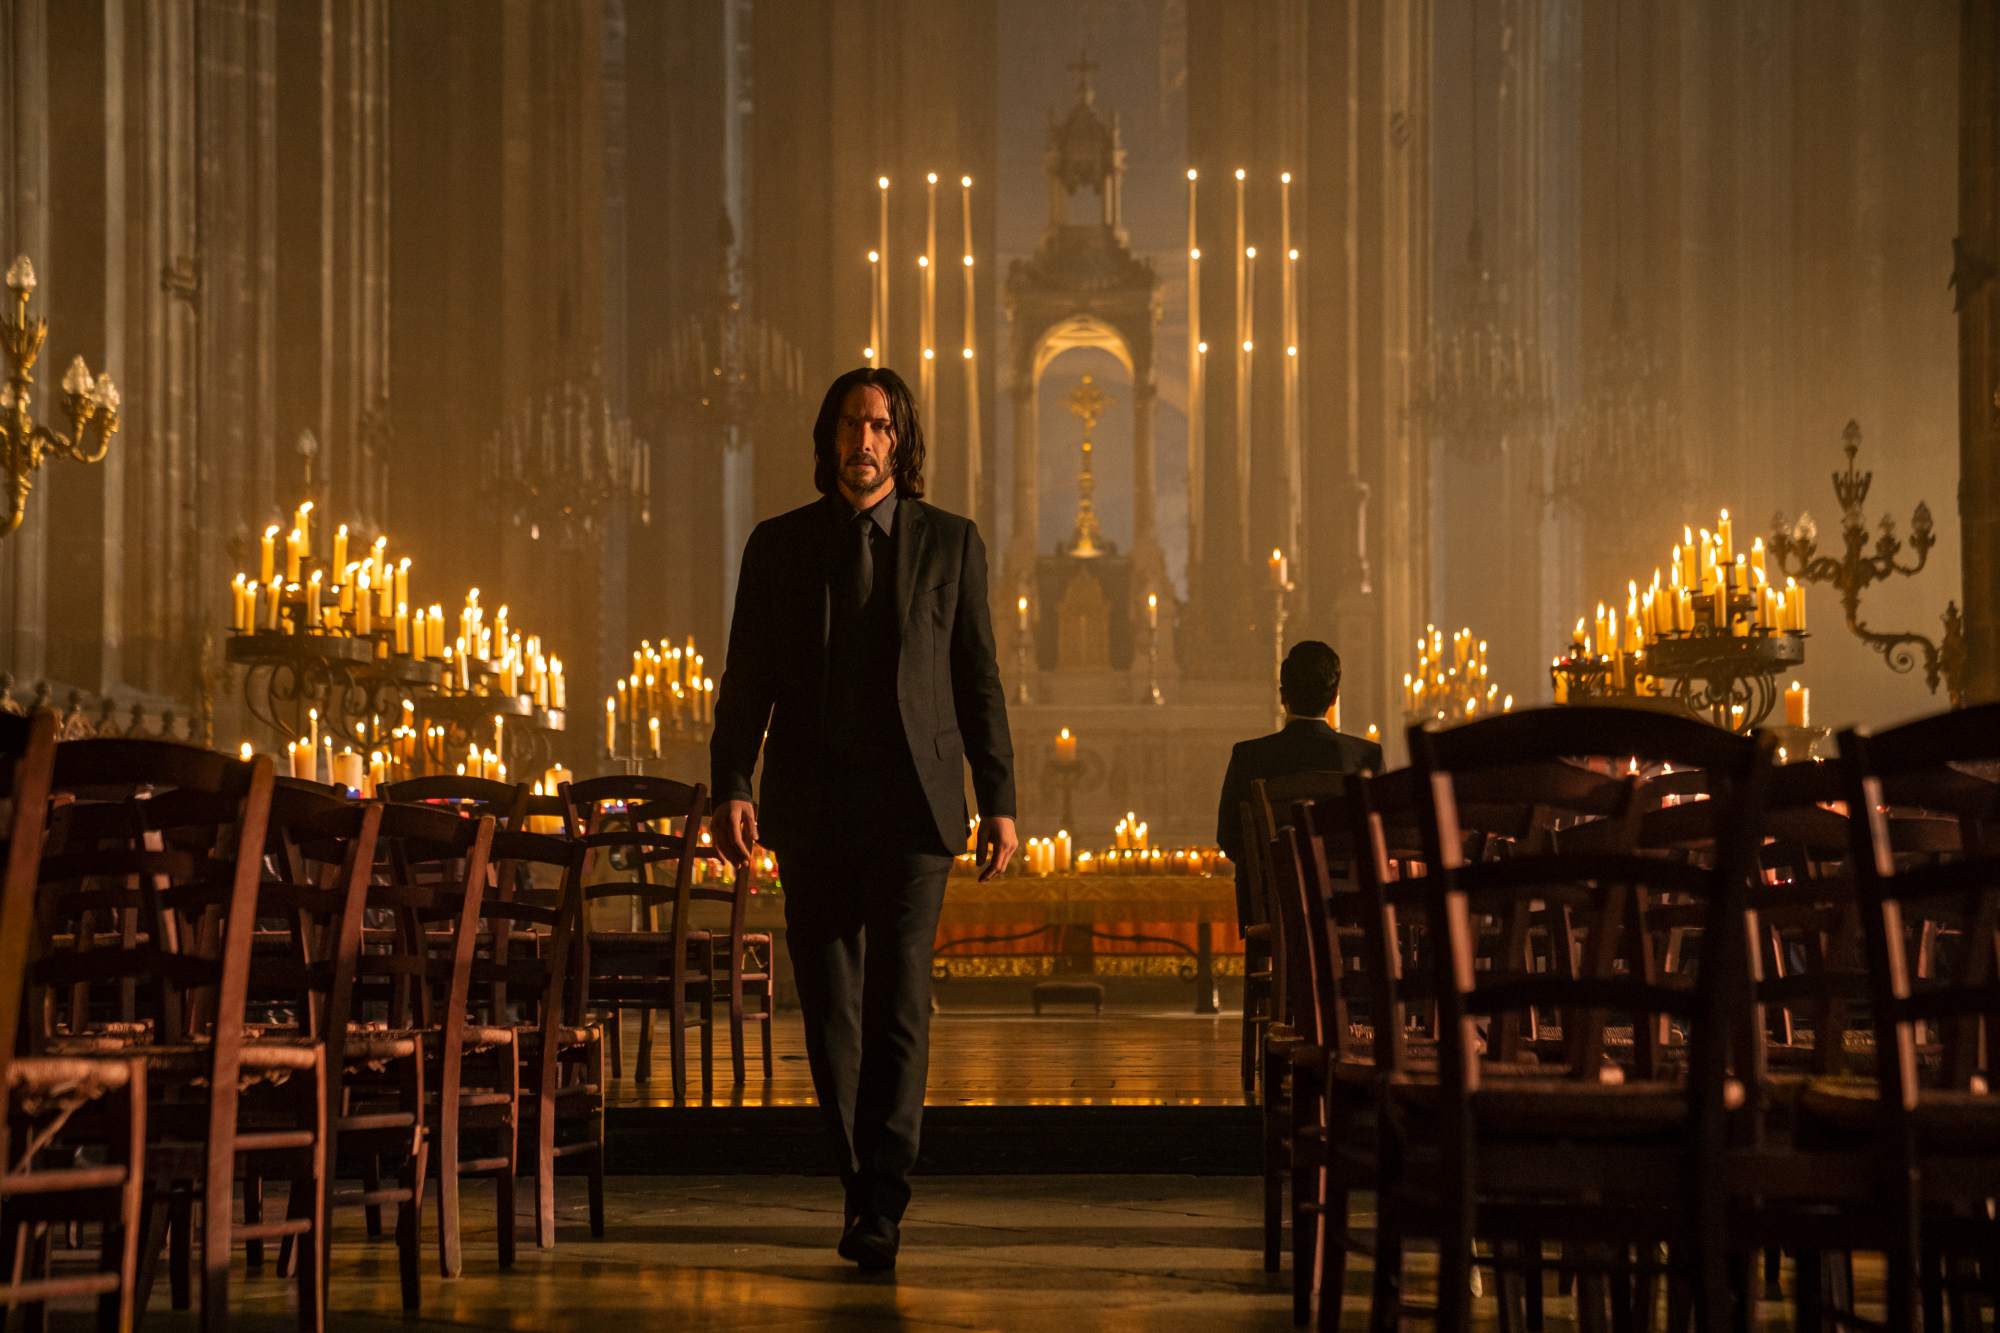 'John Wick: Chapter 4' Keanu Reeves as John Wick walking in a church with the background covered in lit candles